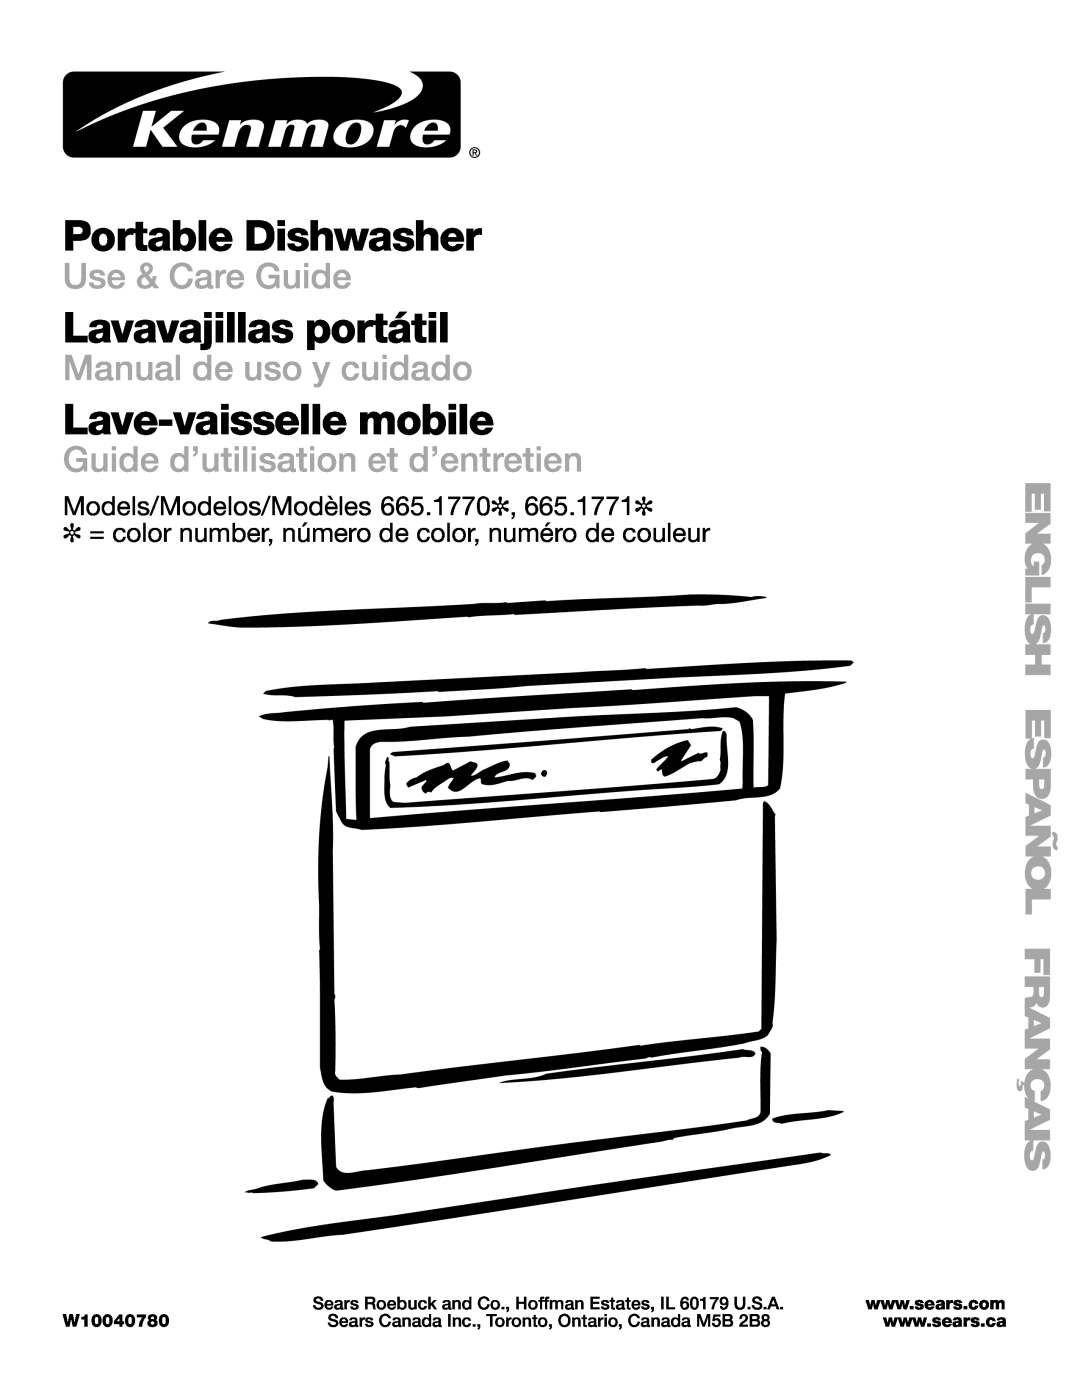 Kenmore 665.1771 manual Sears Roebuck and Co., Hoffman Estates, IL 60179 U.S.A, W10040780, Portable Dishwasher 